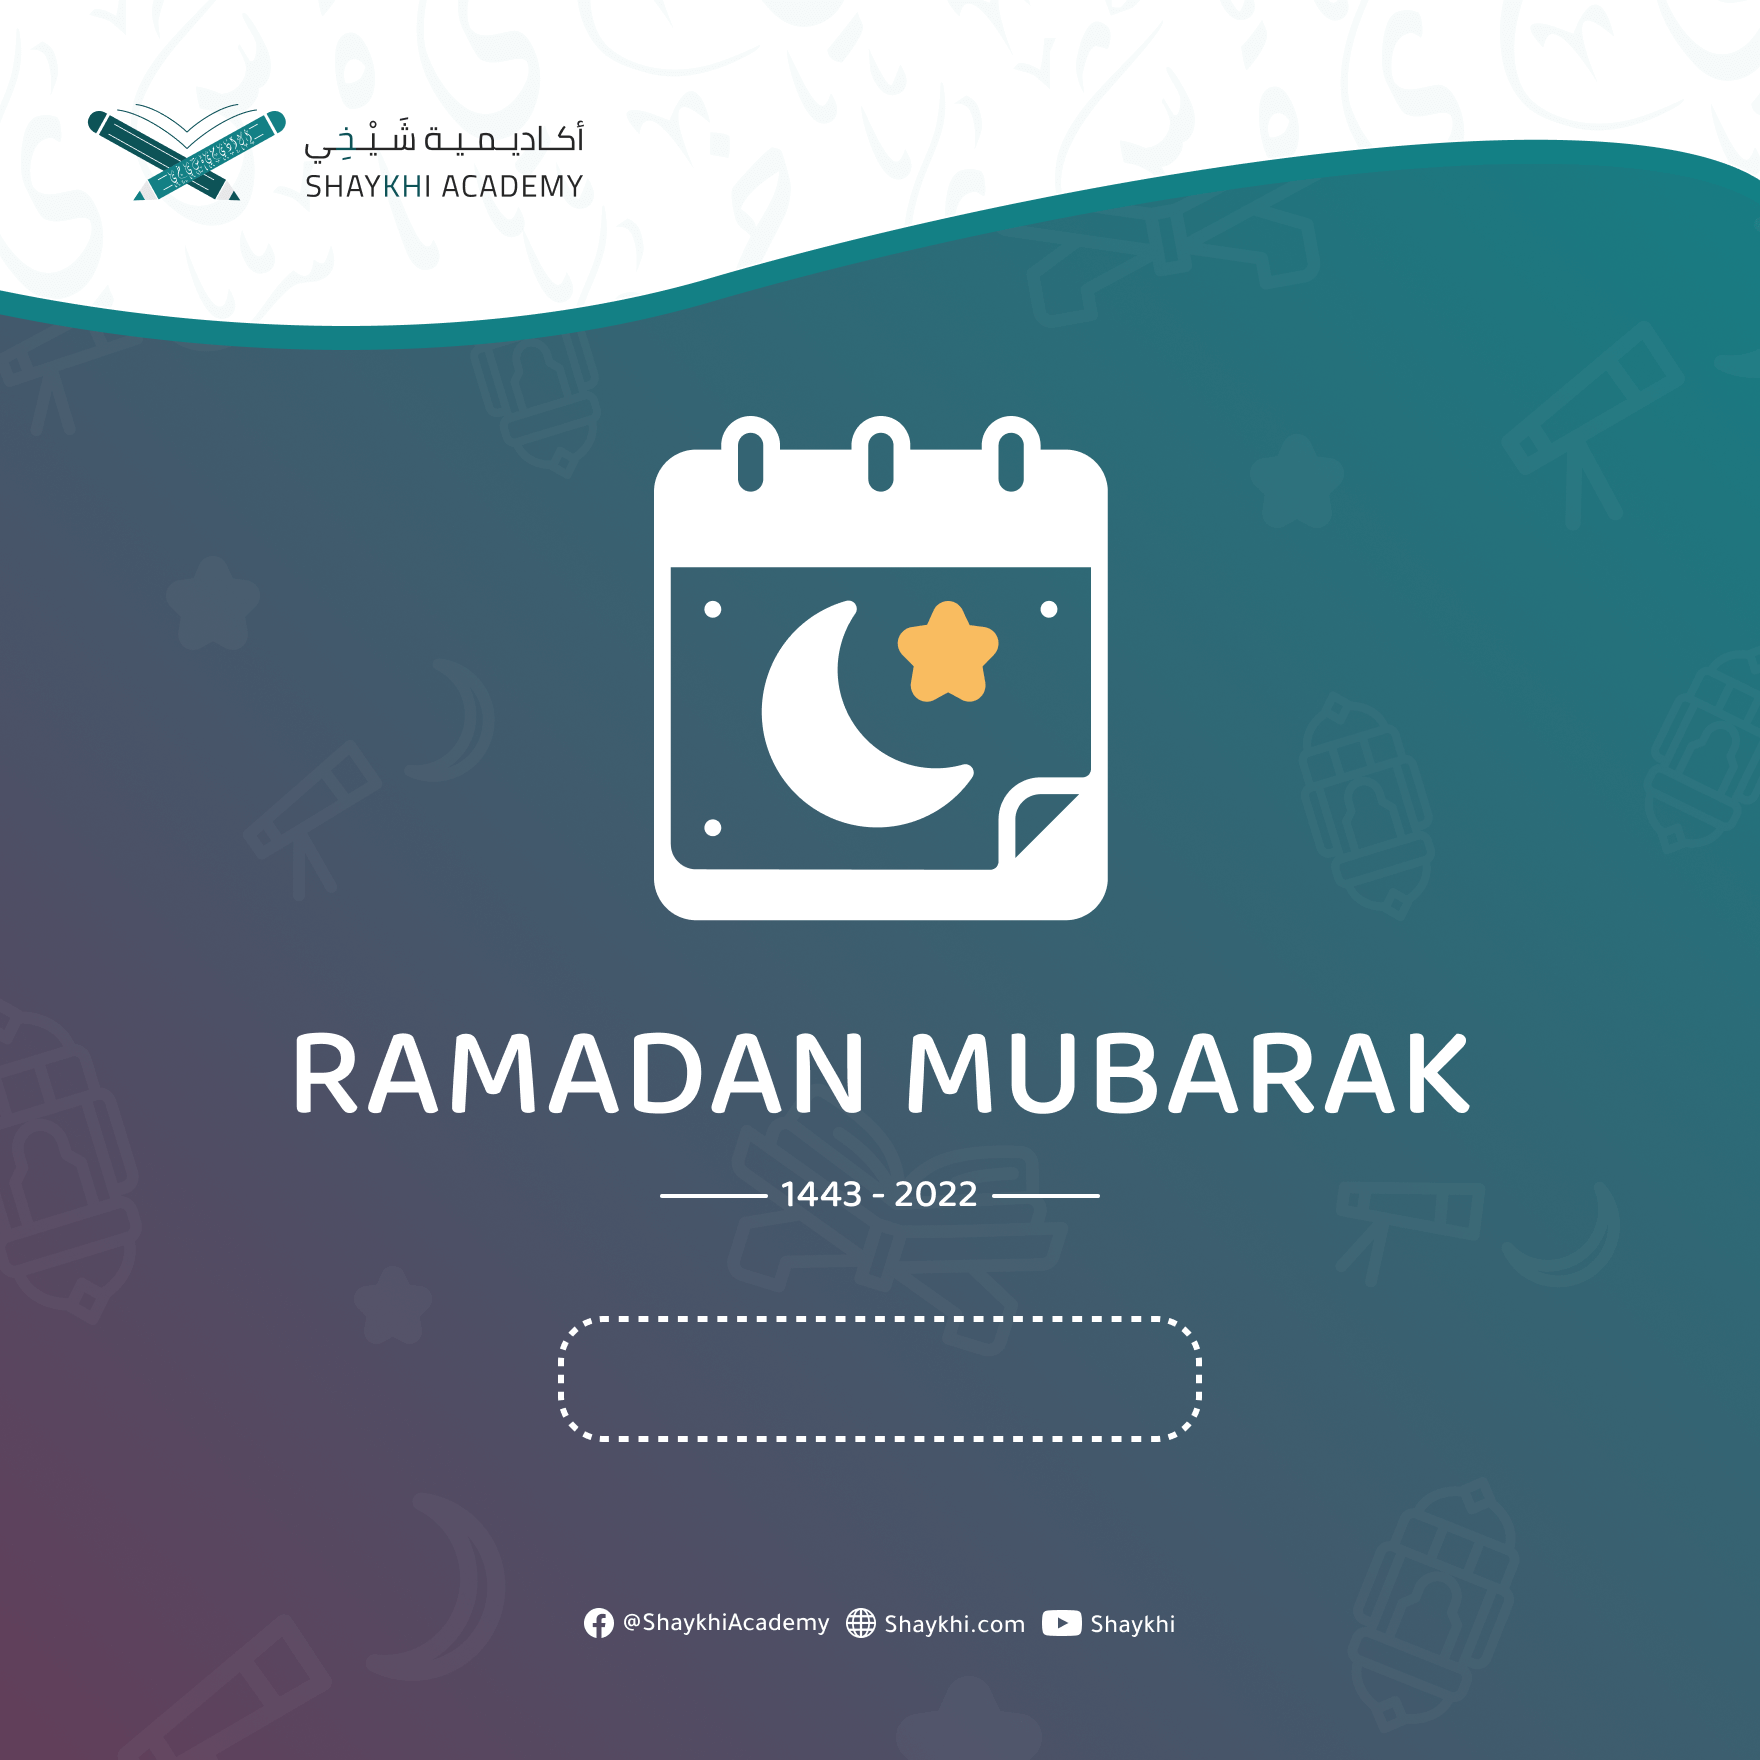 Ramadan Mubarak Images and Meaning - cards for Quran Students 5 Kids and teenagers template 2